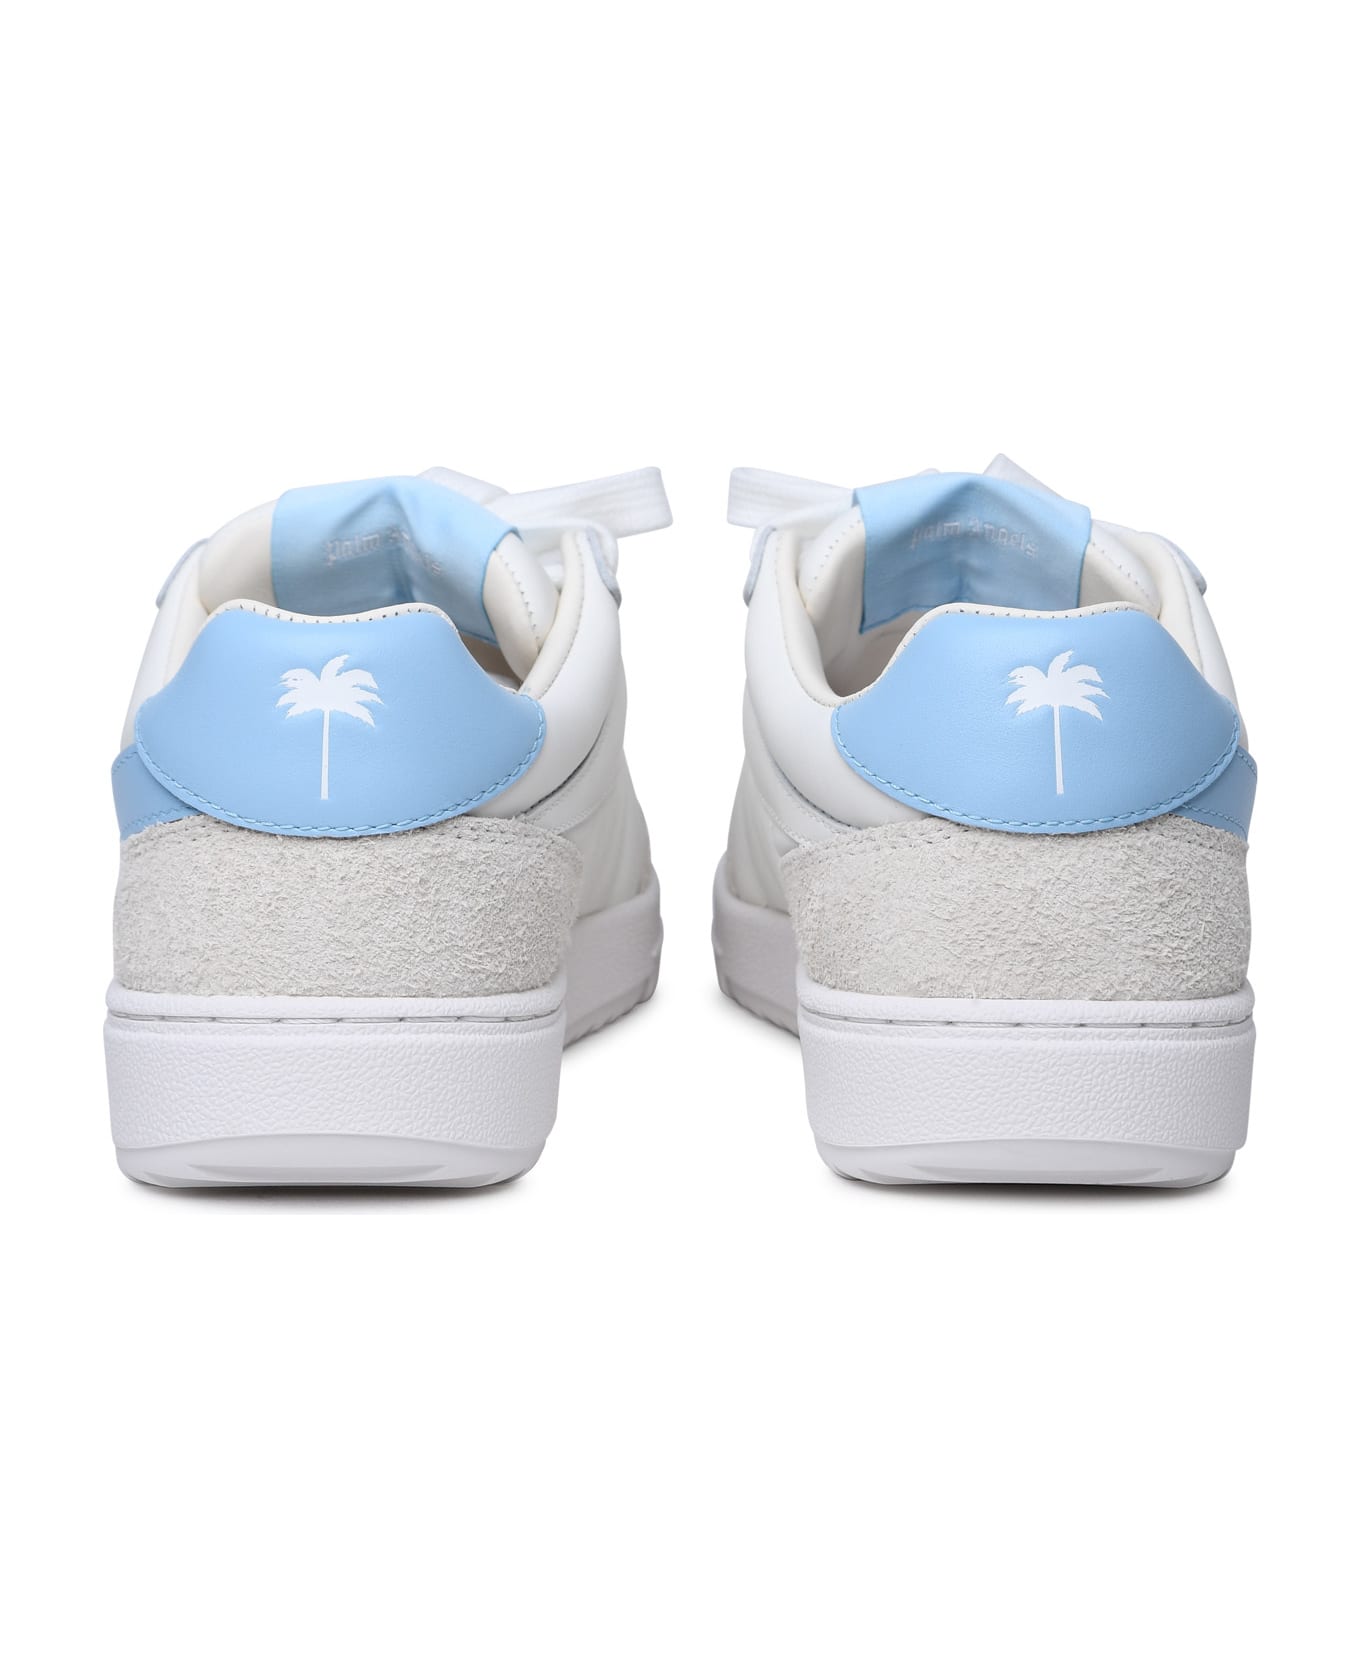 Palm Angels 'palm Beach University' White Leather Sneakers - White スニーカー